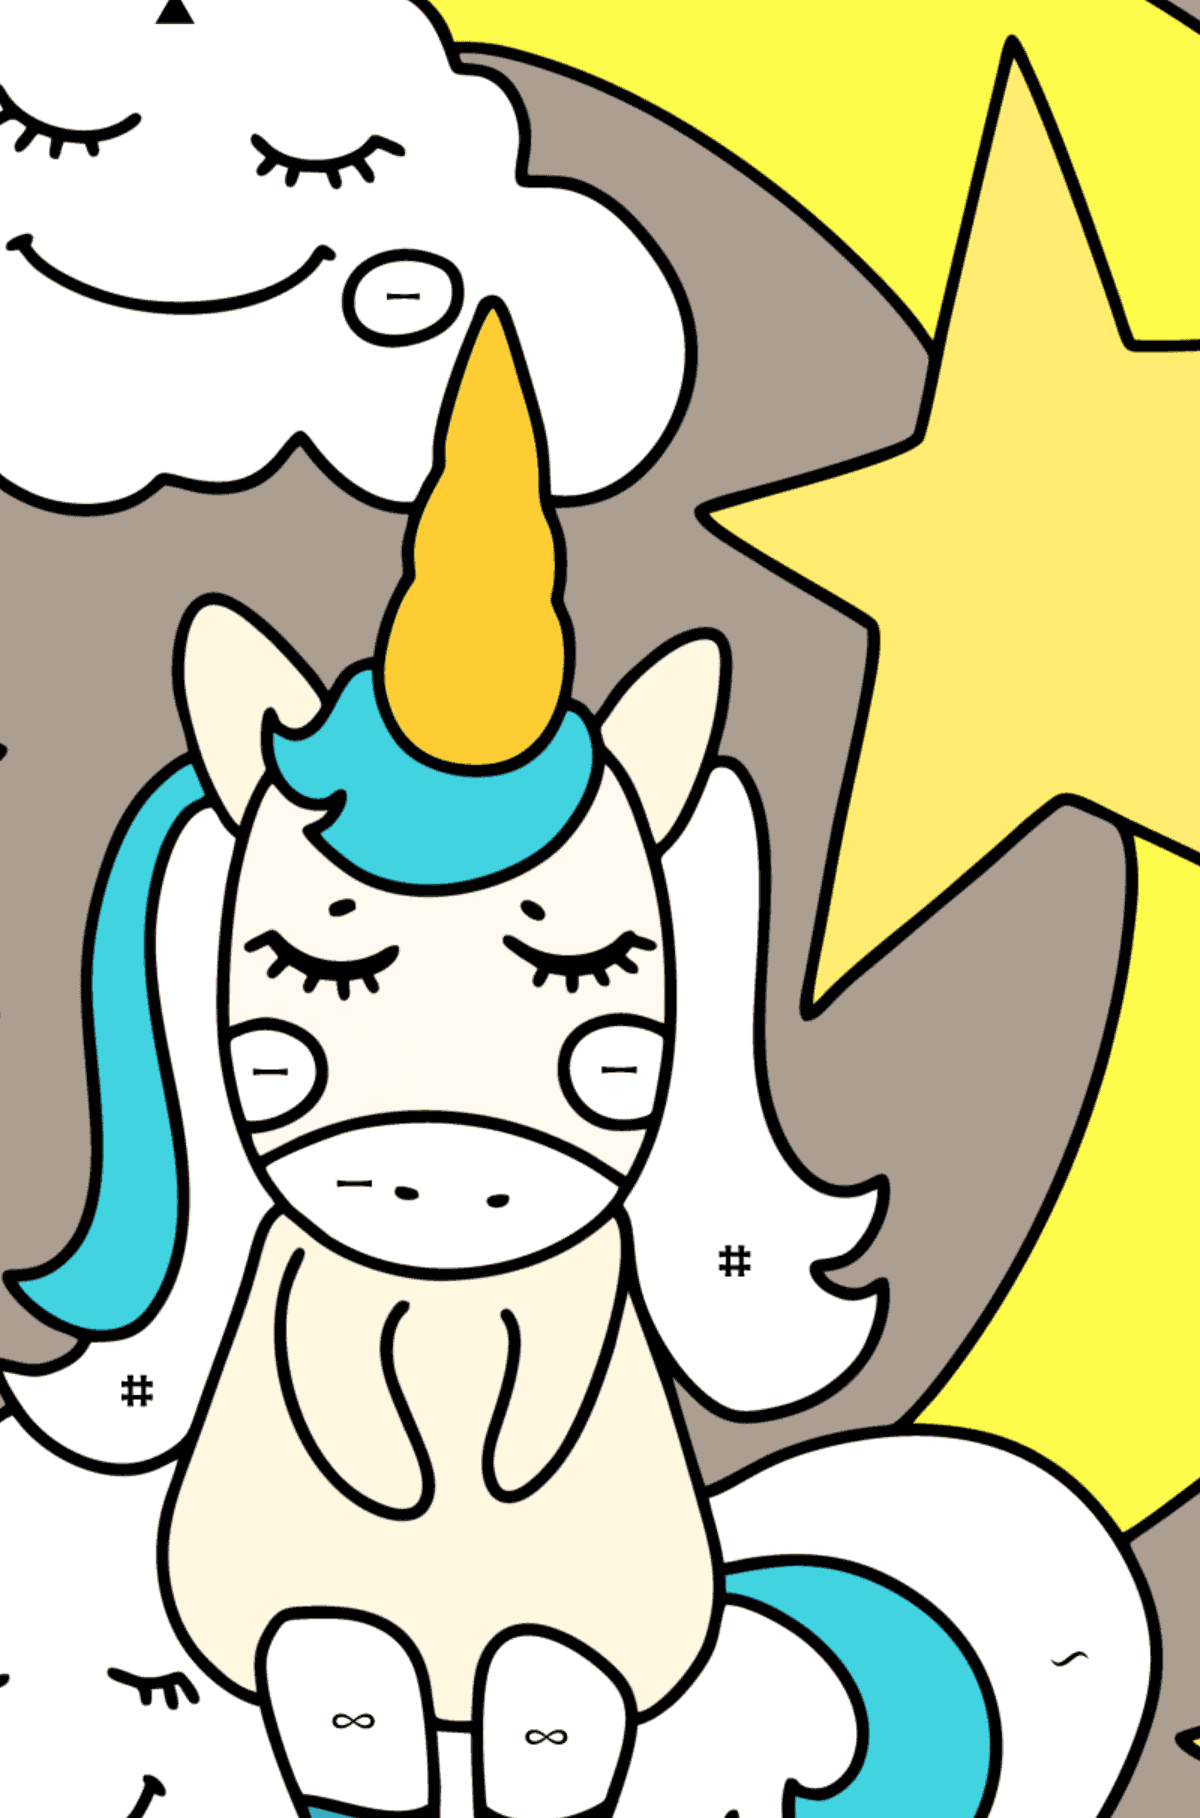 Star unicorn coloring page - Coloring by Symbols for Kids